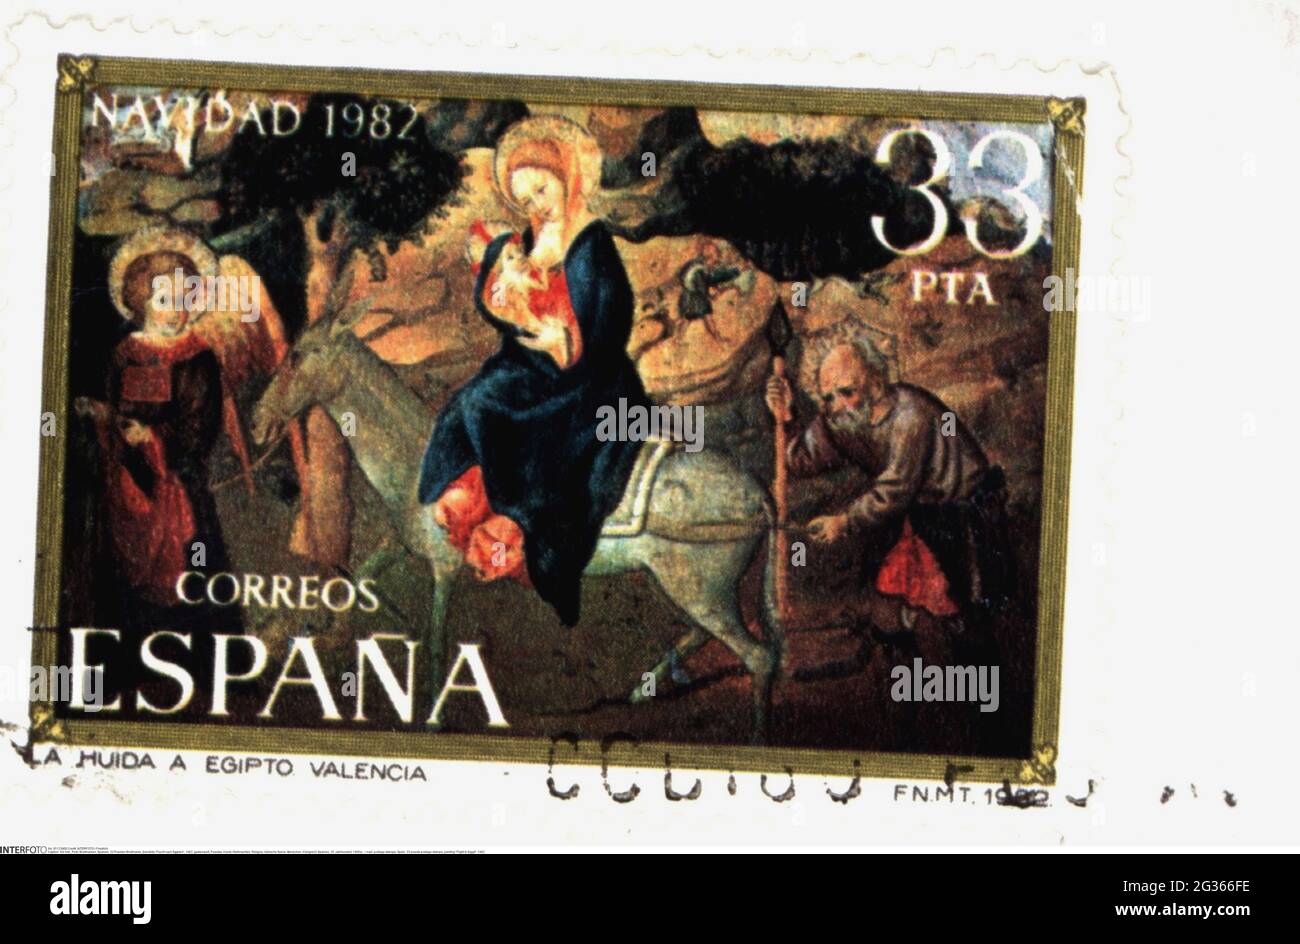 mail, postage stamps, Spain, 33 peseta postage stamps, painting 'Flight to Egypt', 1982, ADDITIONAL-RIGHTS-CLEARANCE-INFO-NOT-AVAILABLE Stock Photo